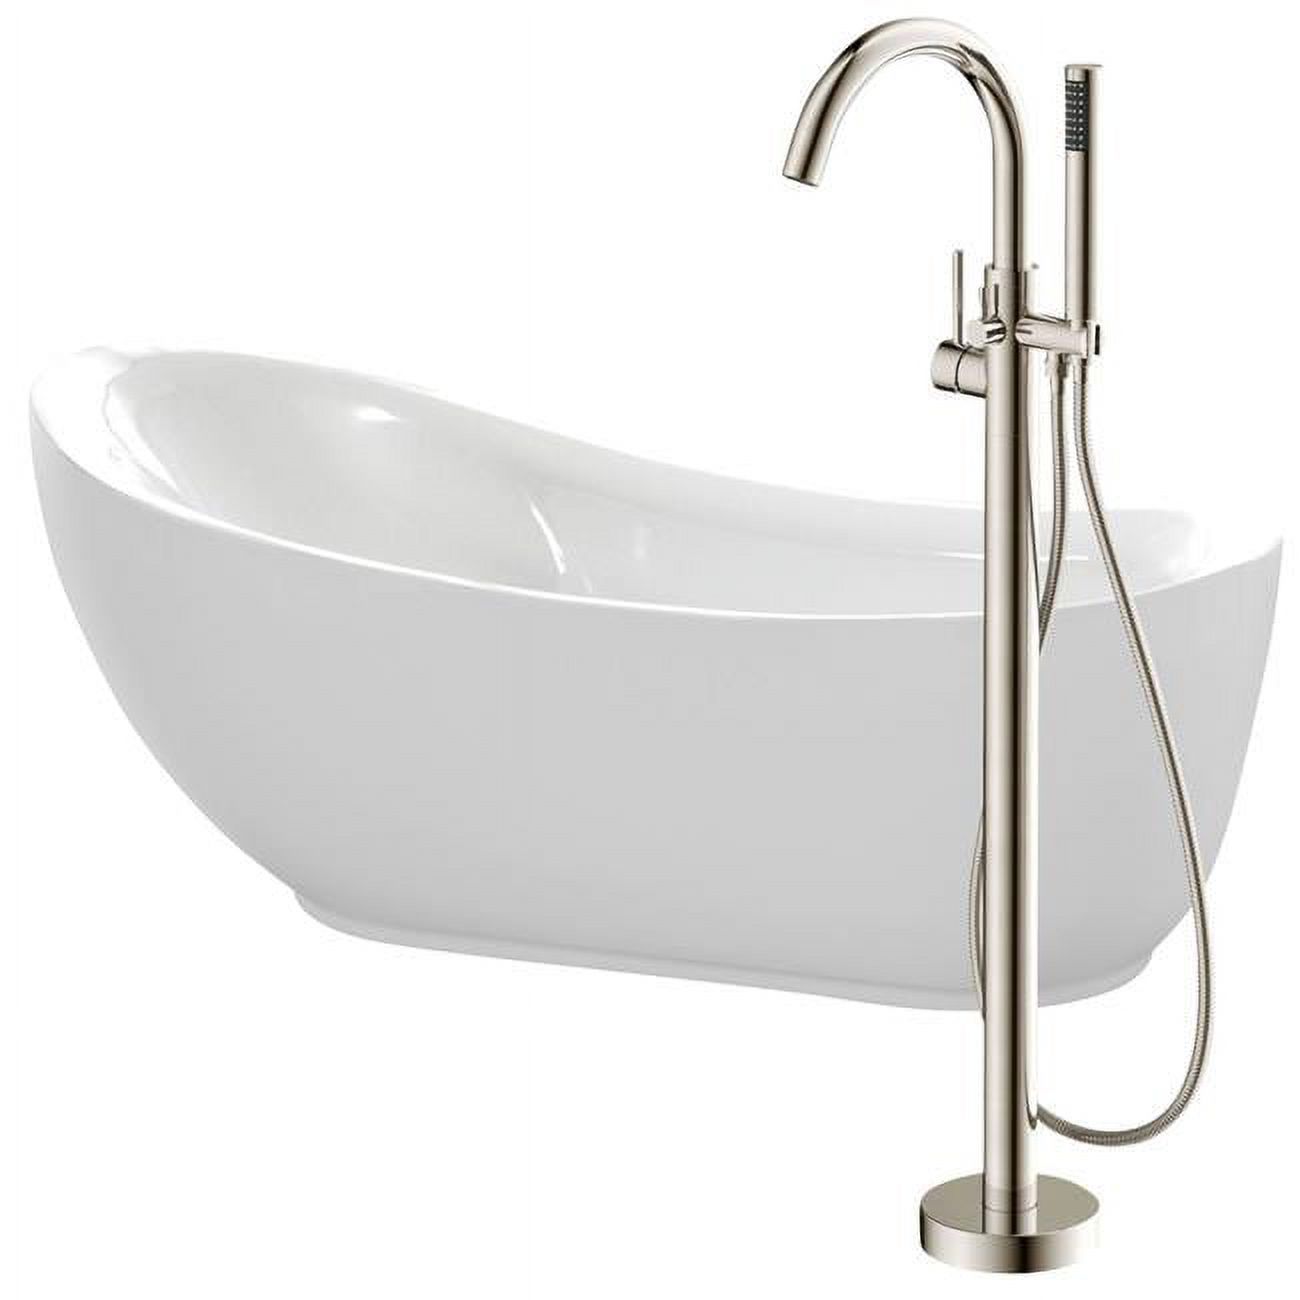 Anzzi FTAZ090-0025B 30 x 35 x 71 in. Talyah Acrylic Flatbottom Non-Whirlpool Bathtub in White with Kros Faucet&#44; Brushed Nickel - image 1 of 1